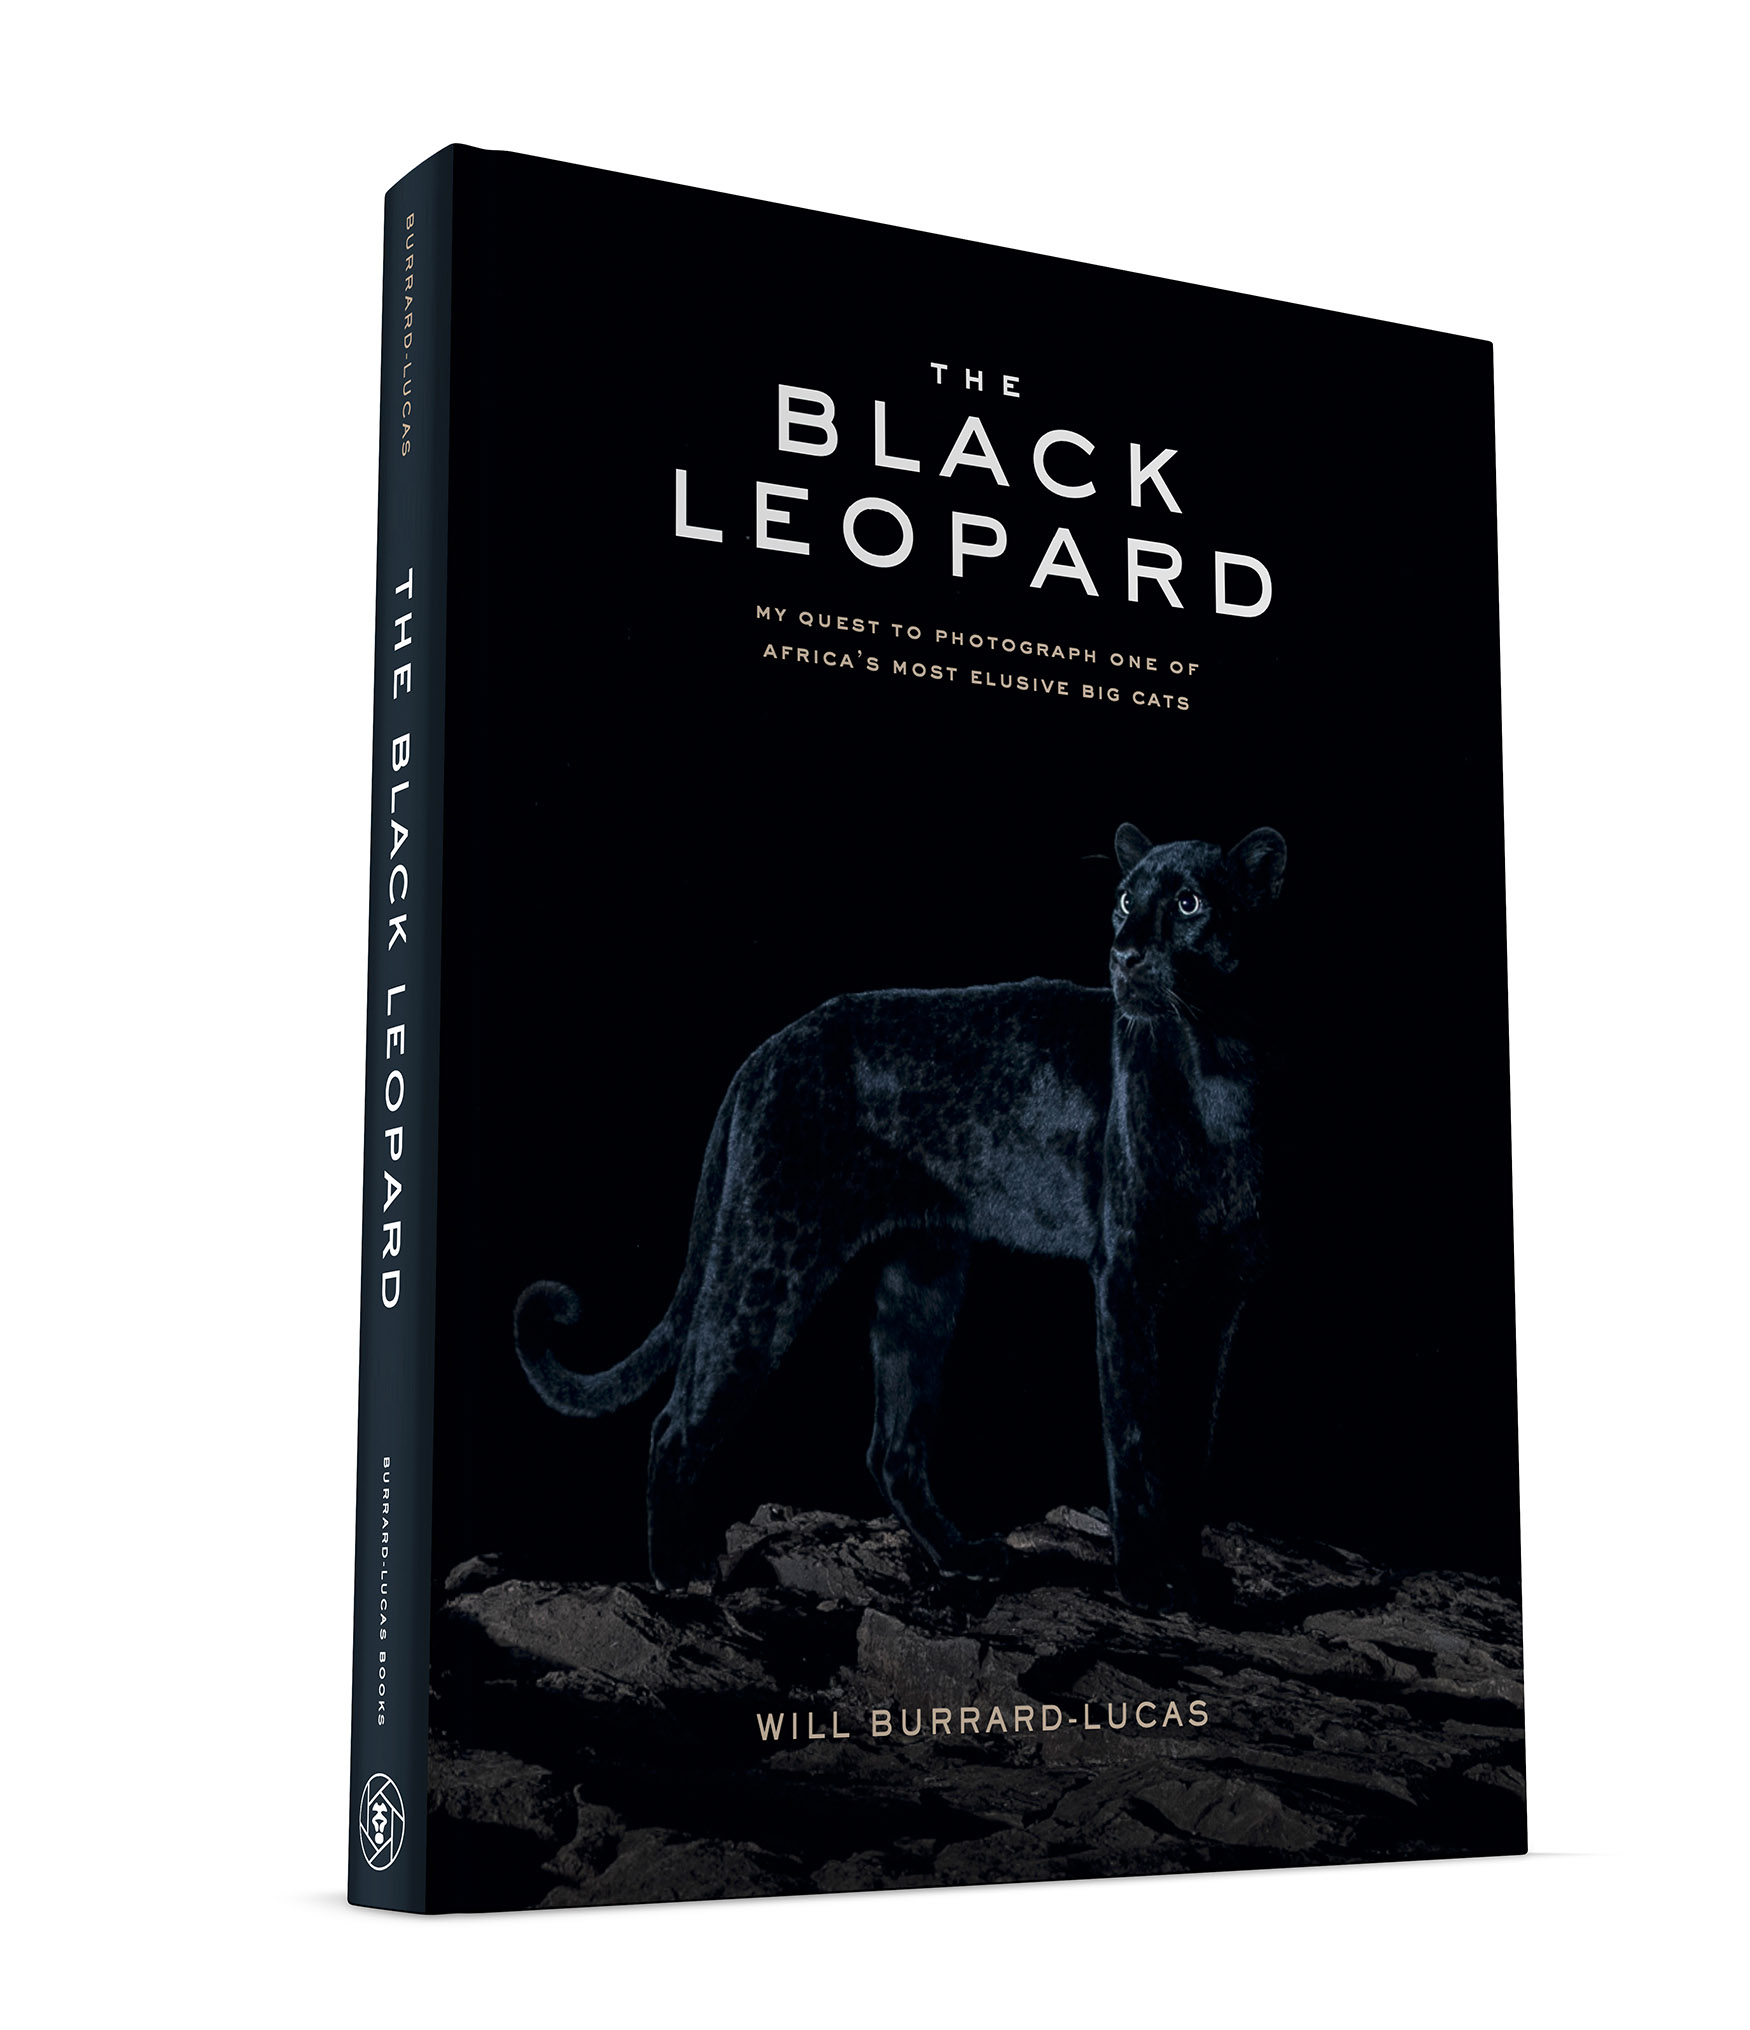 The Black Leopard: My Quest to Photograph One of Africa's Most Elusive Big  Cats